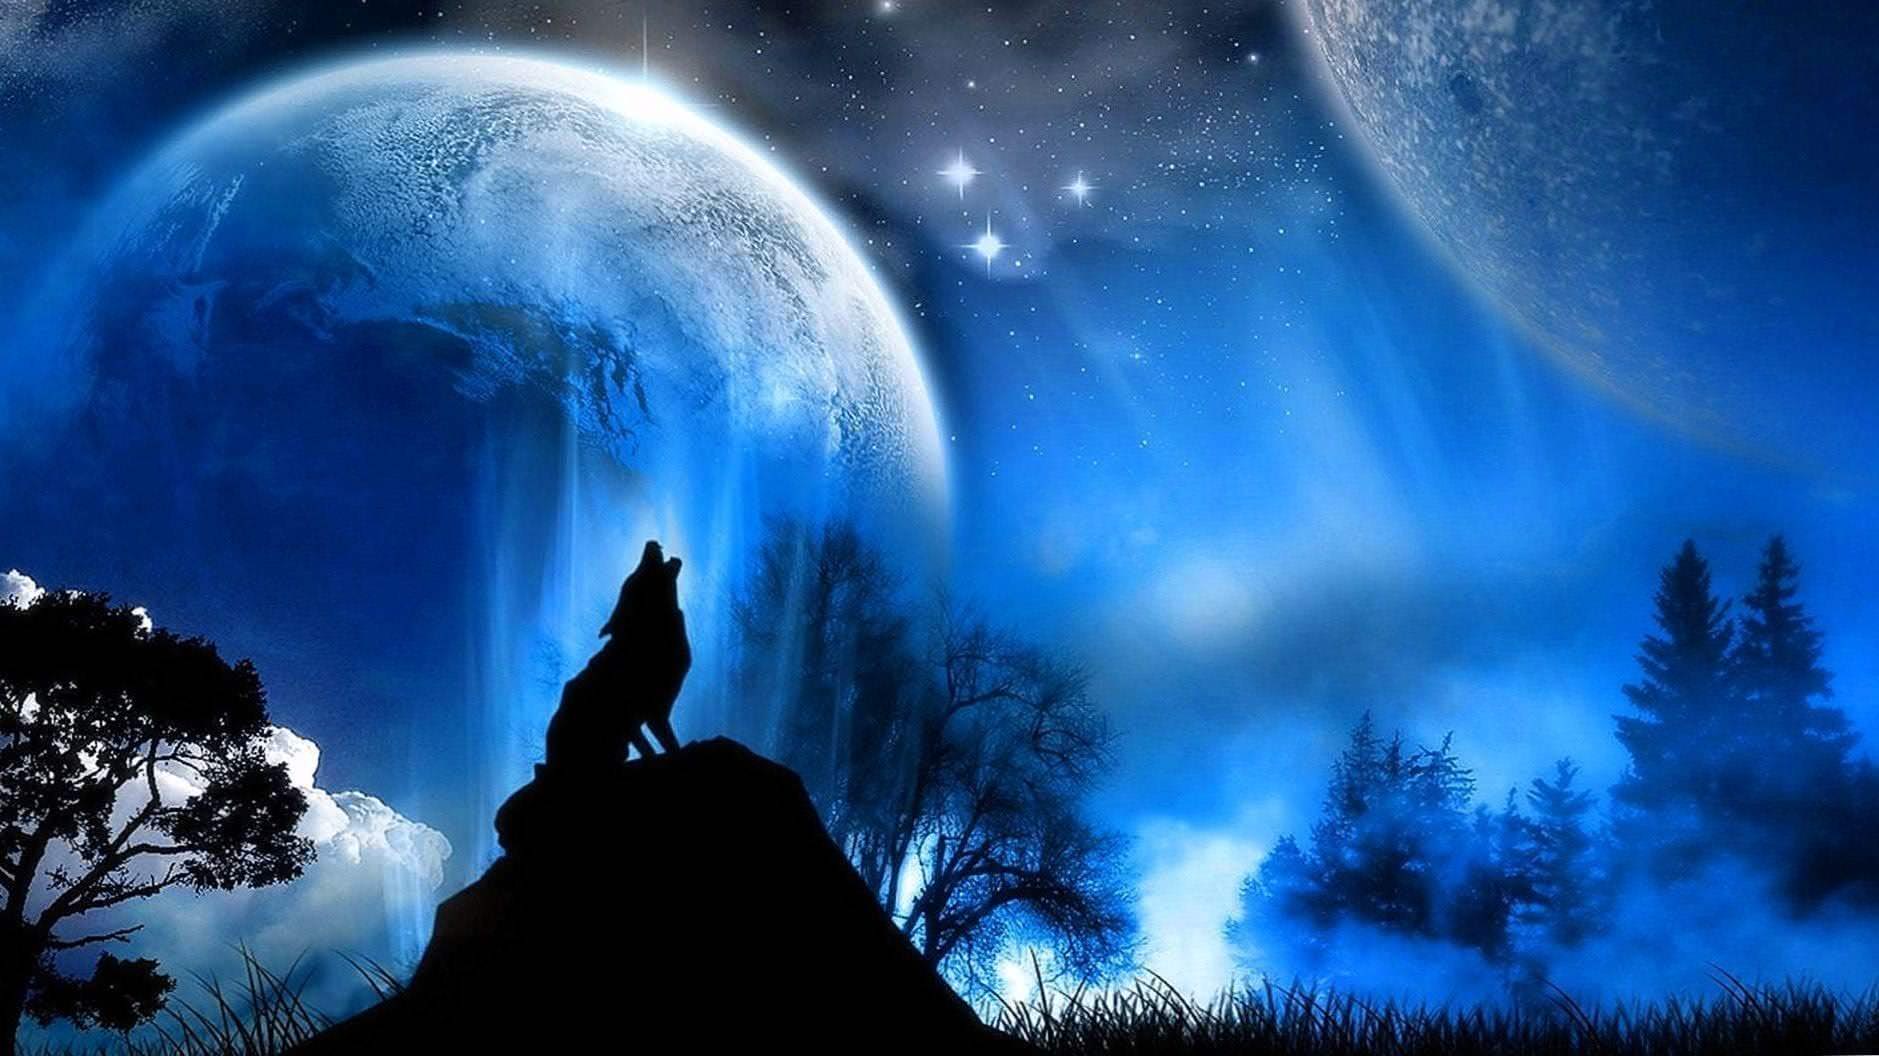 HD Wallpapers 1080p Of Wolf